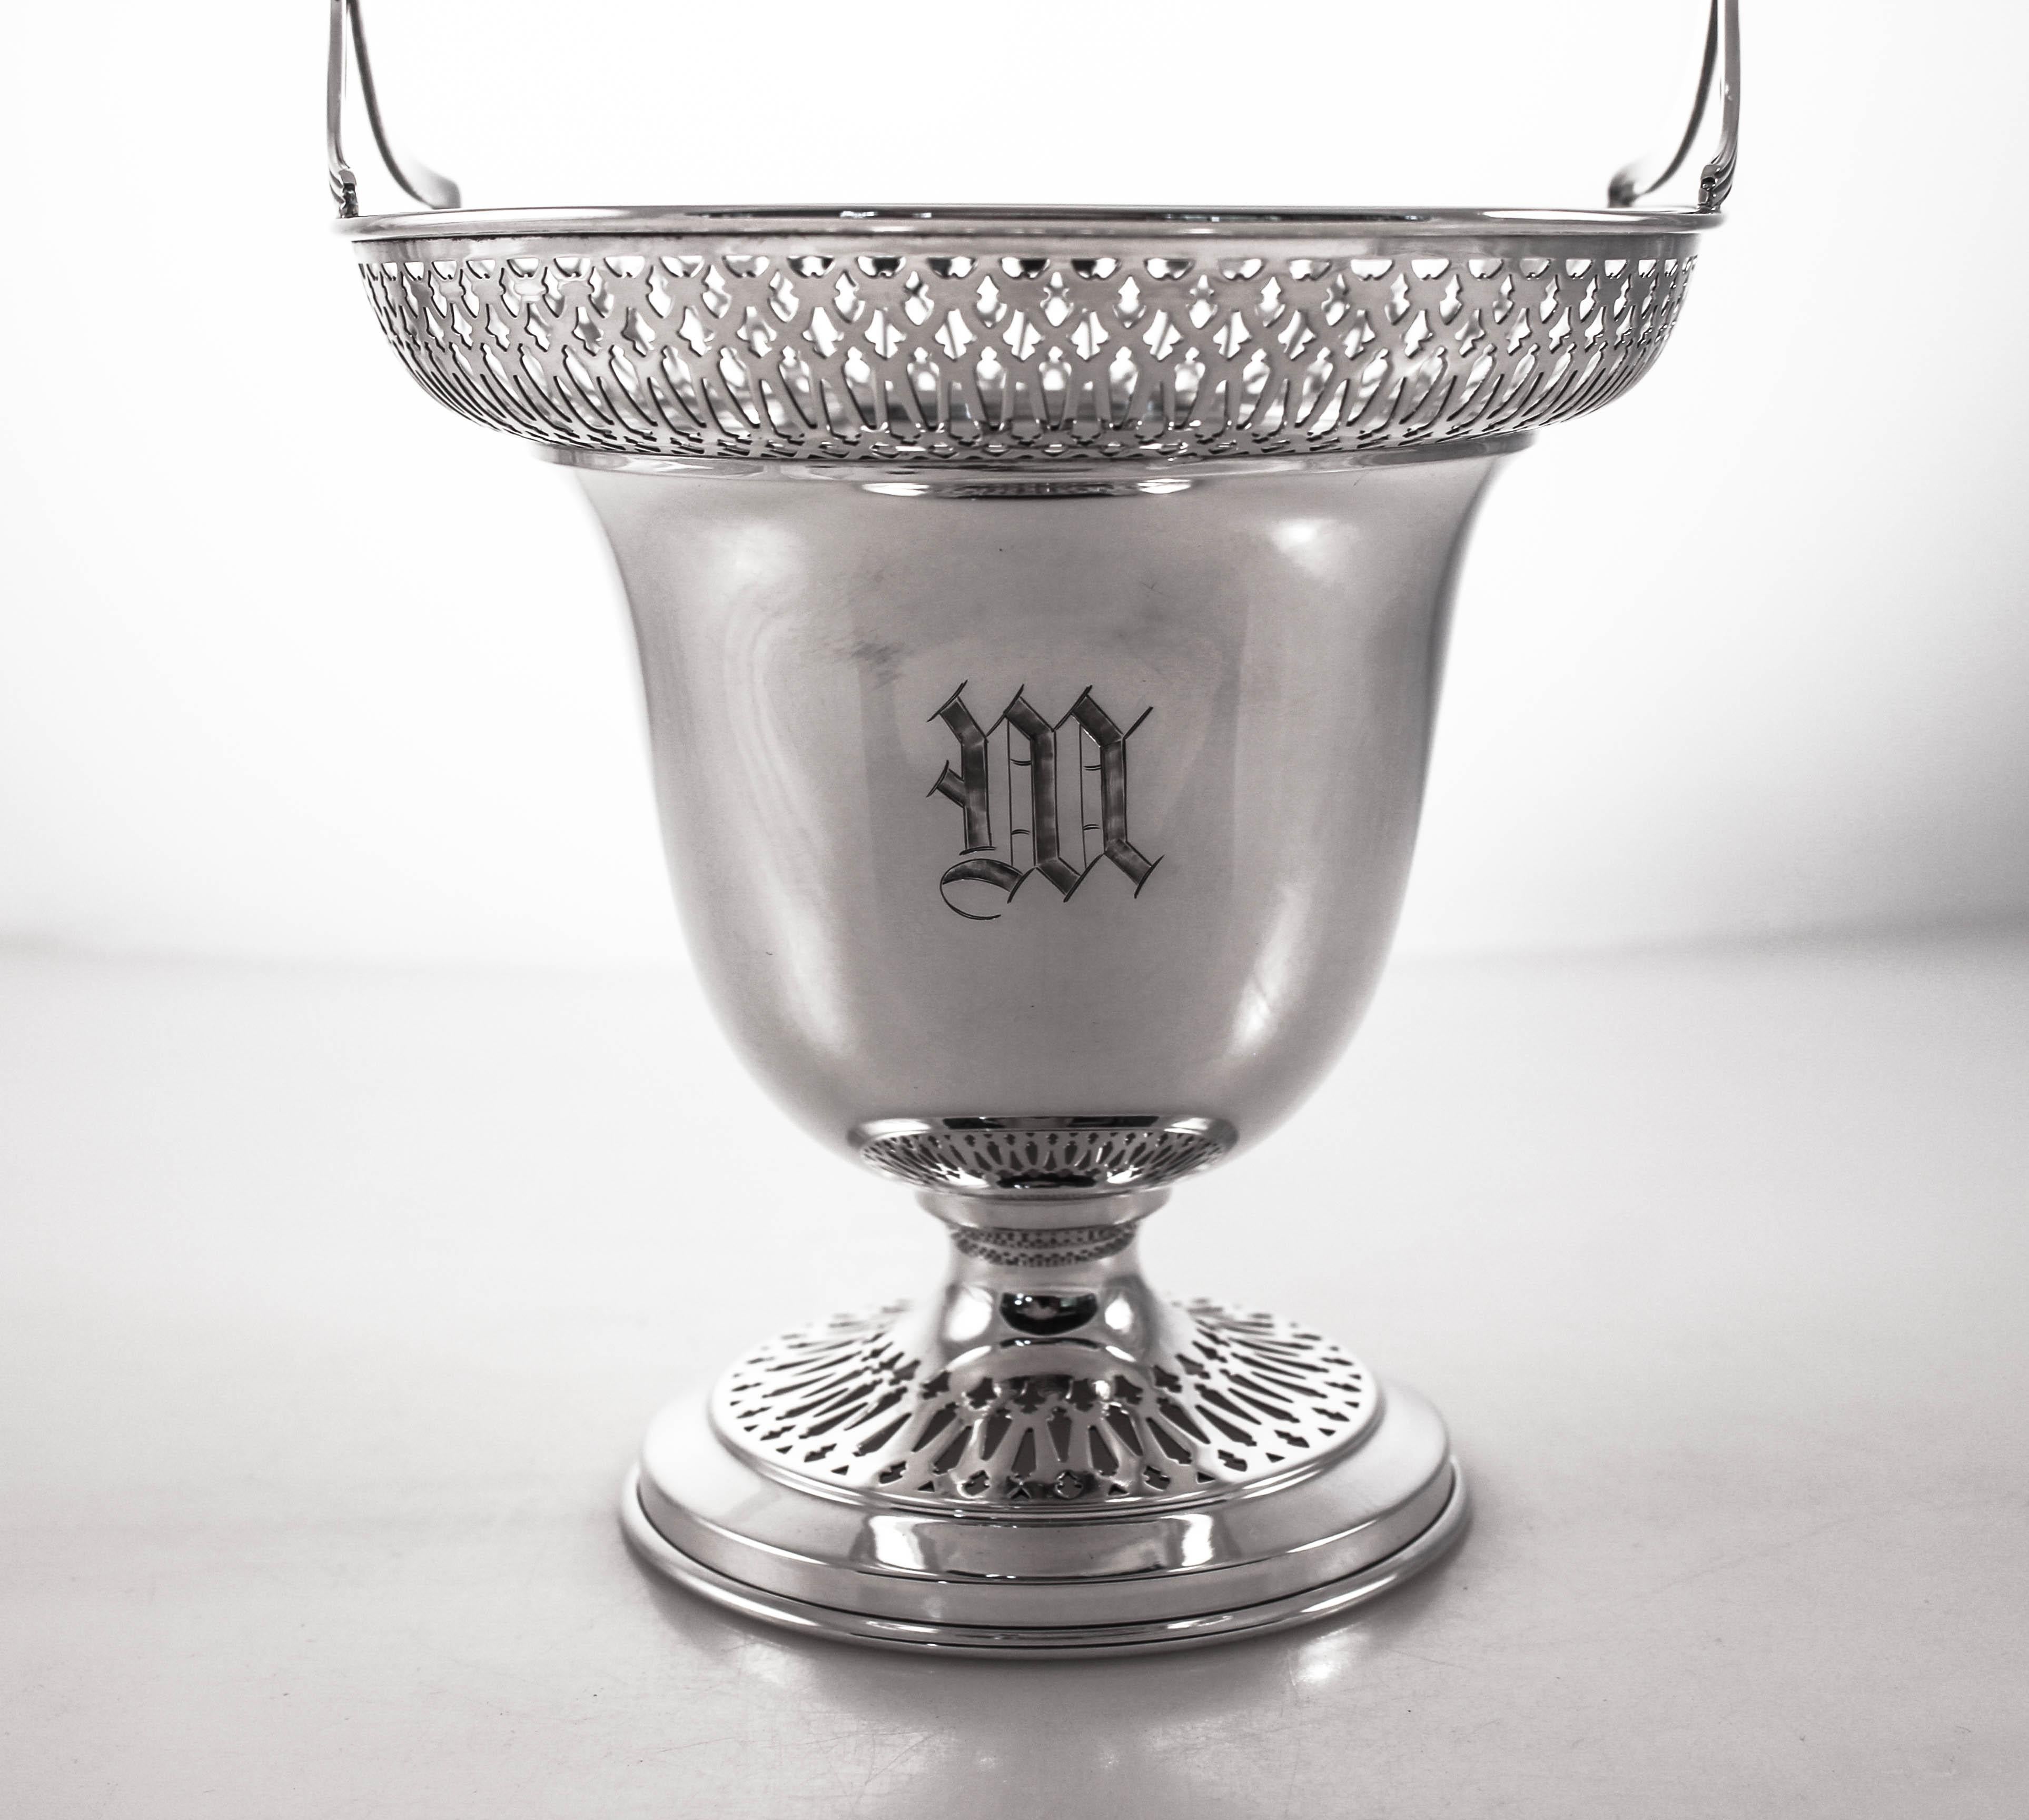 We are proud to offer this sterling silver basket by the Meriden Britannia Company of Meriden, CT. A lovely latticework pattern encircles there top as well as the base. Symmetrical and fluer de lis cutouts give it an open, airy feel. The handle is